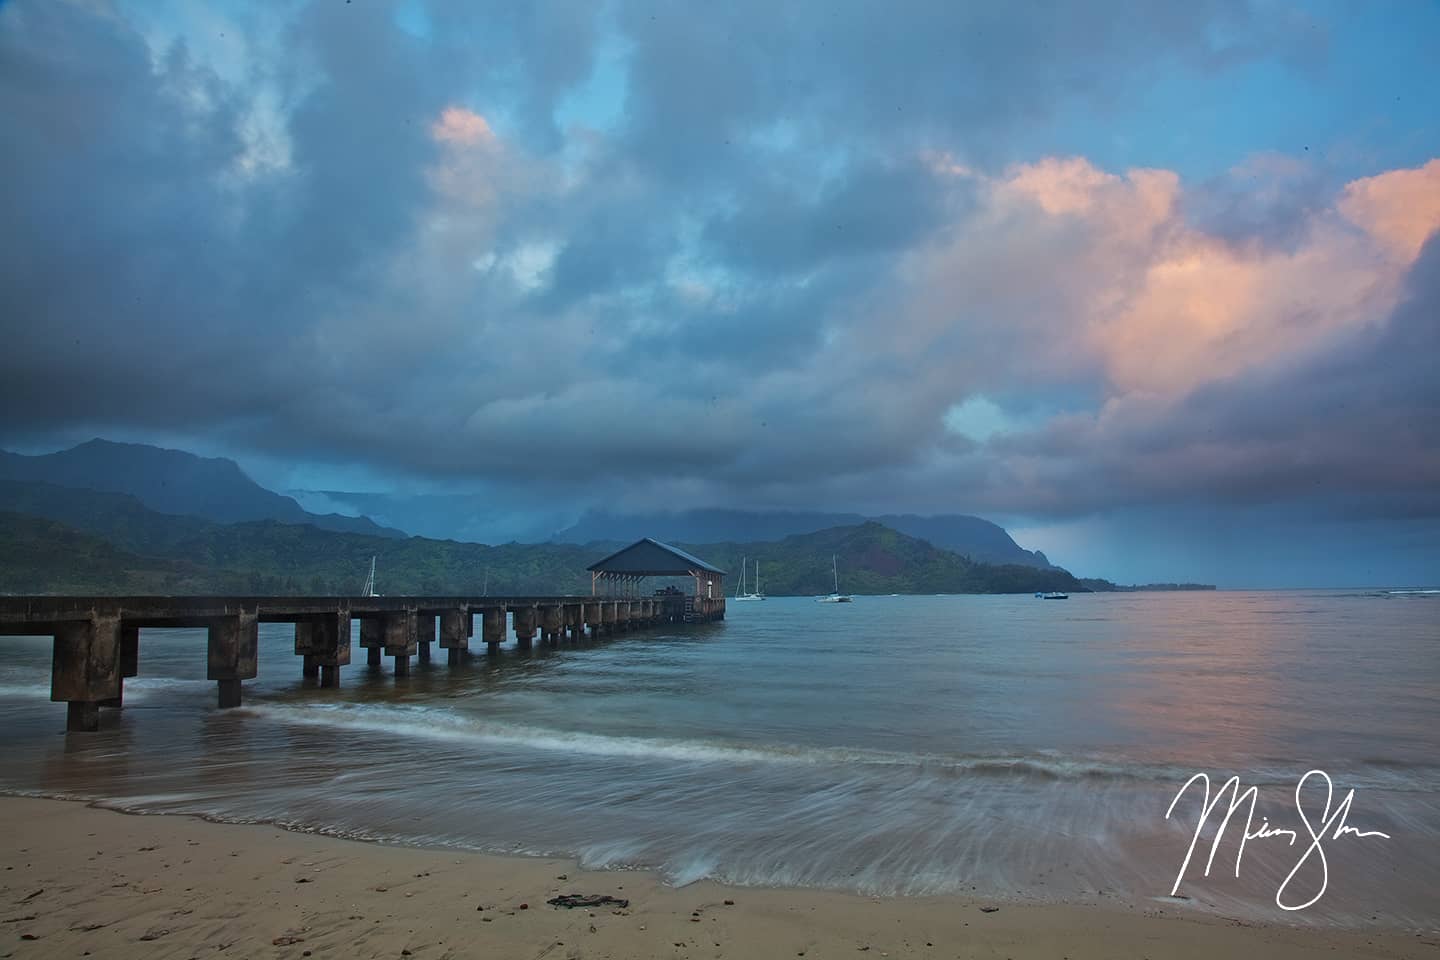 Early Morning at the Hanalei Bay Pier